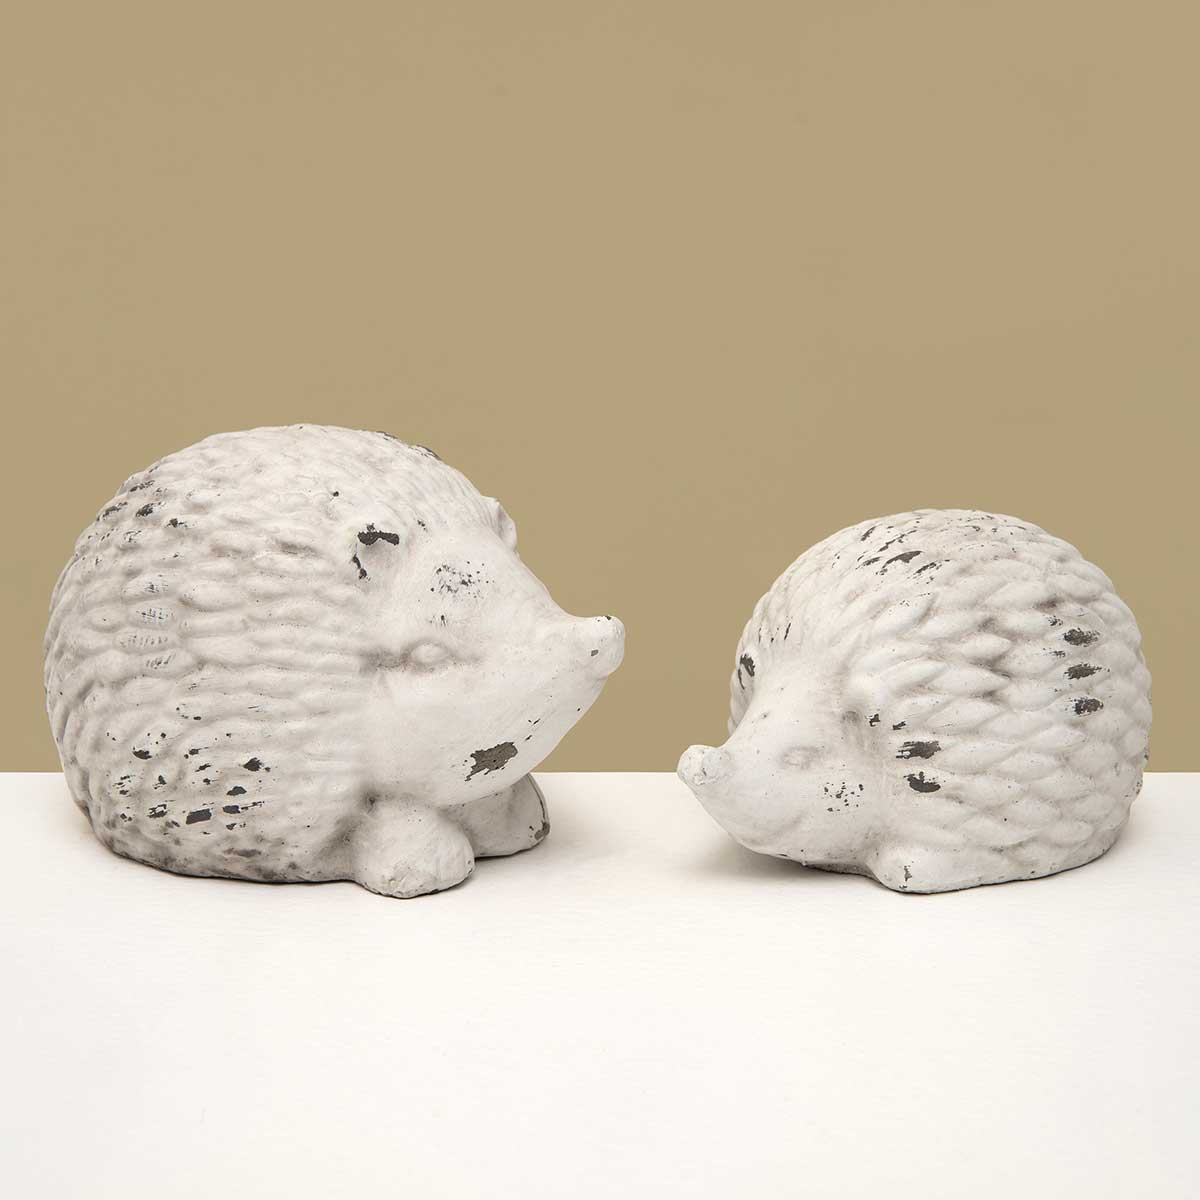 HEDGEHOG LARGE 6IN X 4.5IN X 3.5IN WHITE WASH/GREY CONCRETE - Click Image to Close